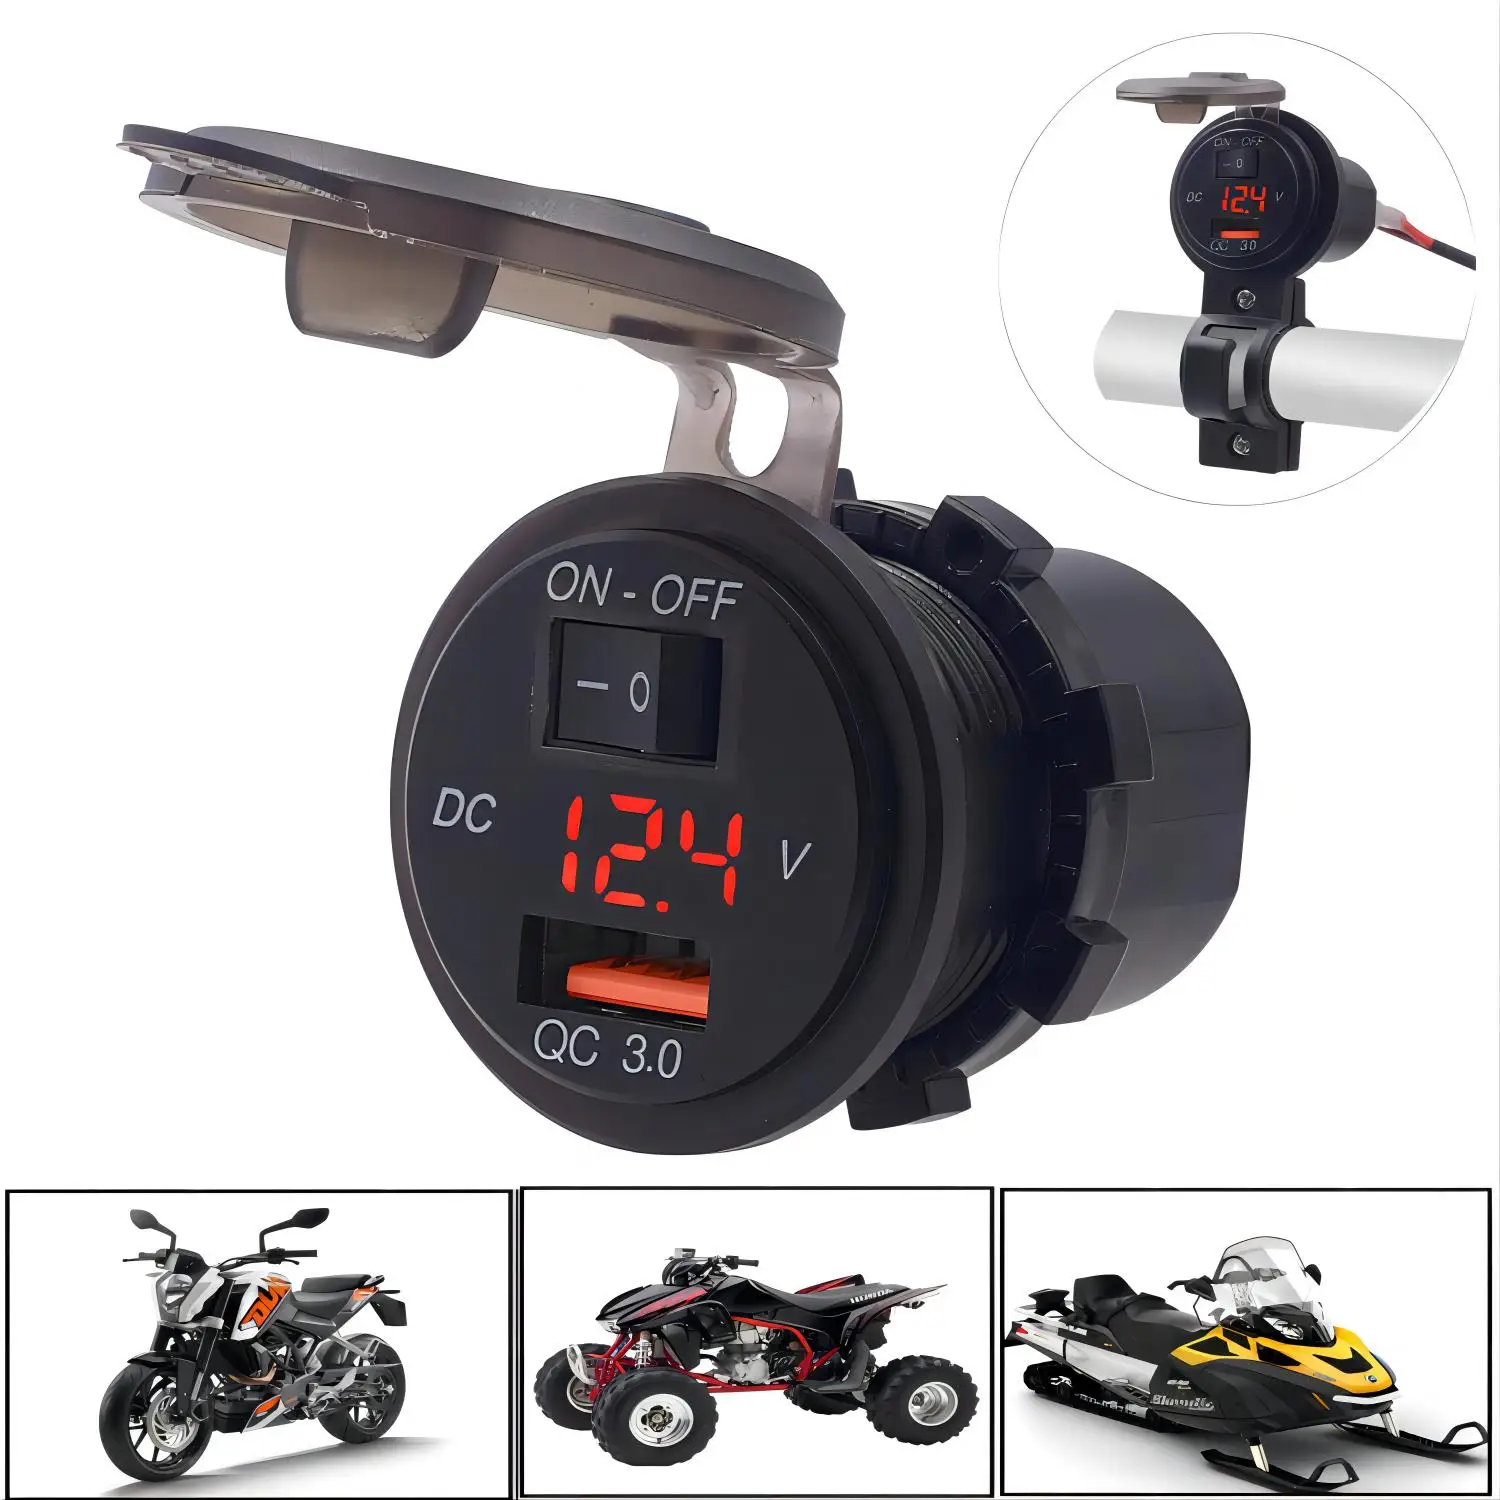 

Motorcycle Usb Voltmeter Fast Charger With Switch Mobile Phone Waterproof Power Socket Cell Phone Plug 12v For Motorbike Outlet